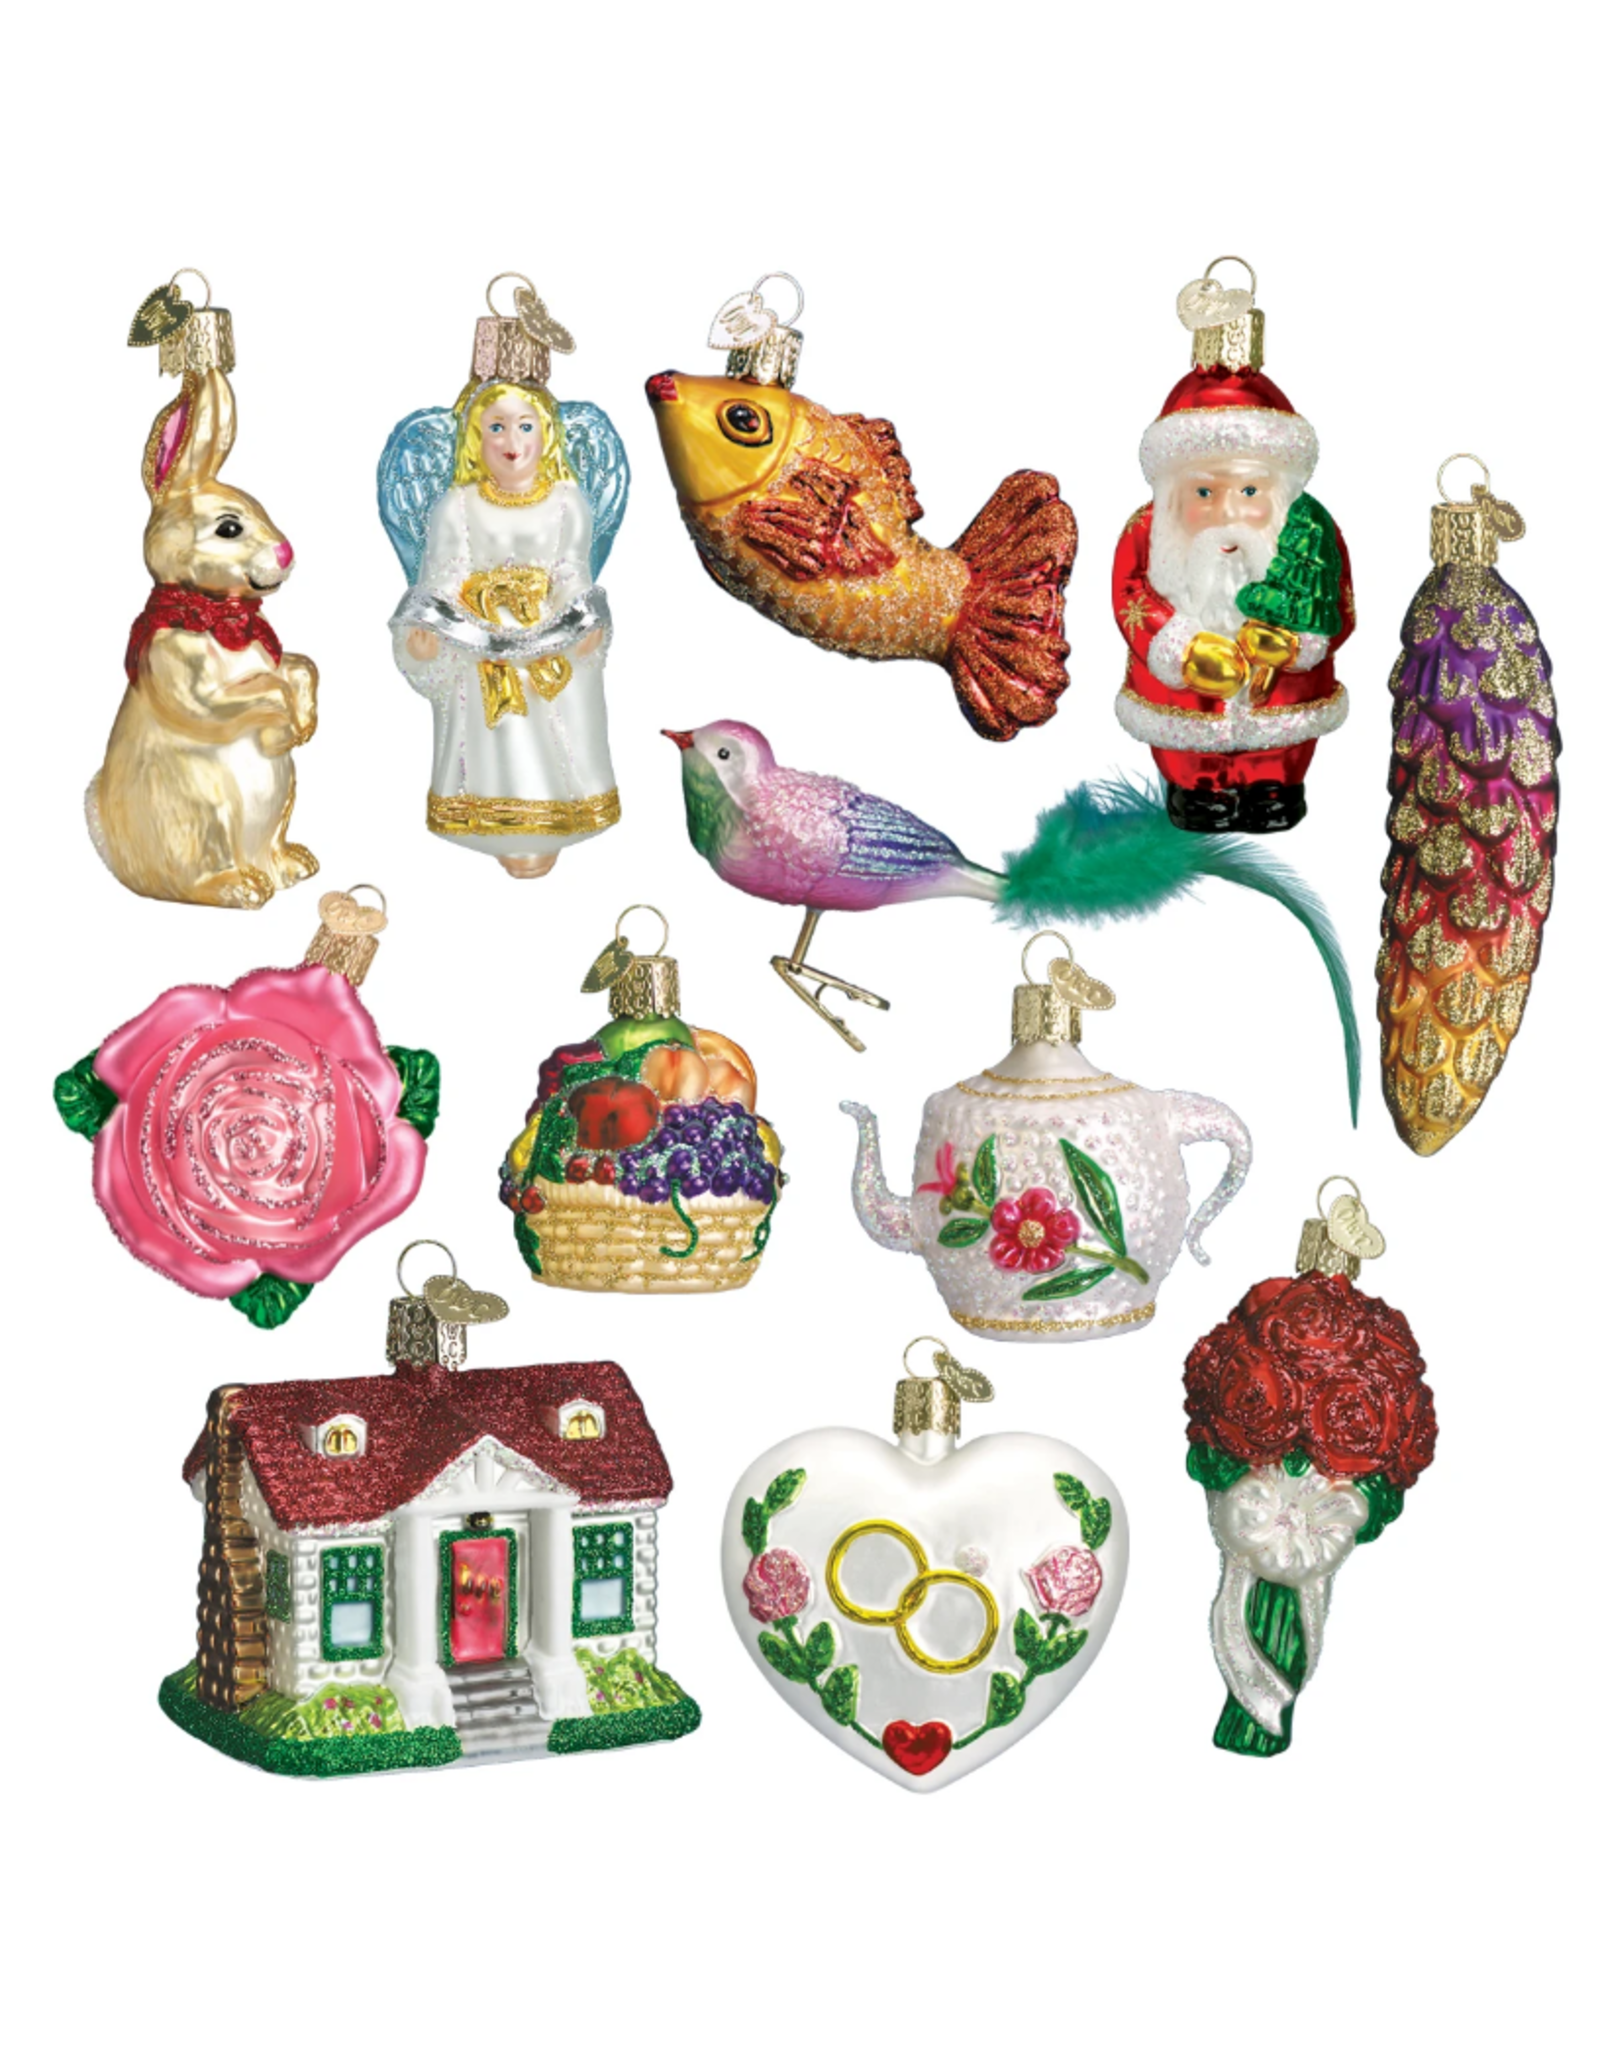 Old World Christmas Bride's Ornament Collection